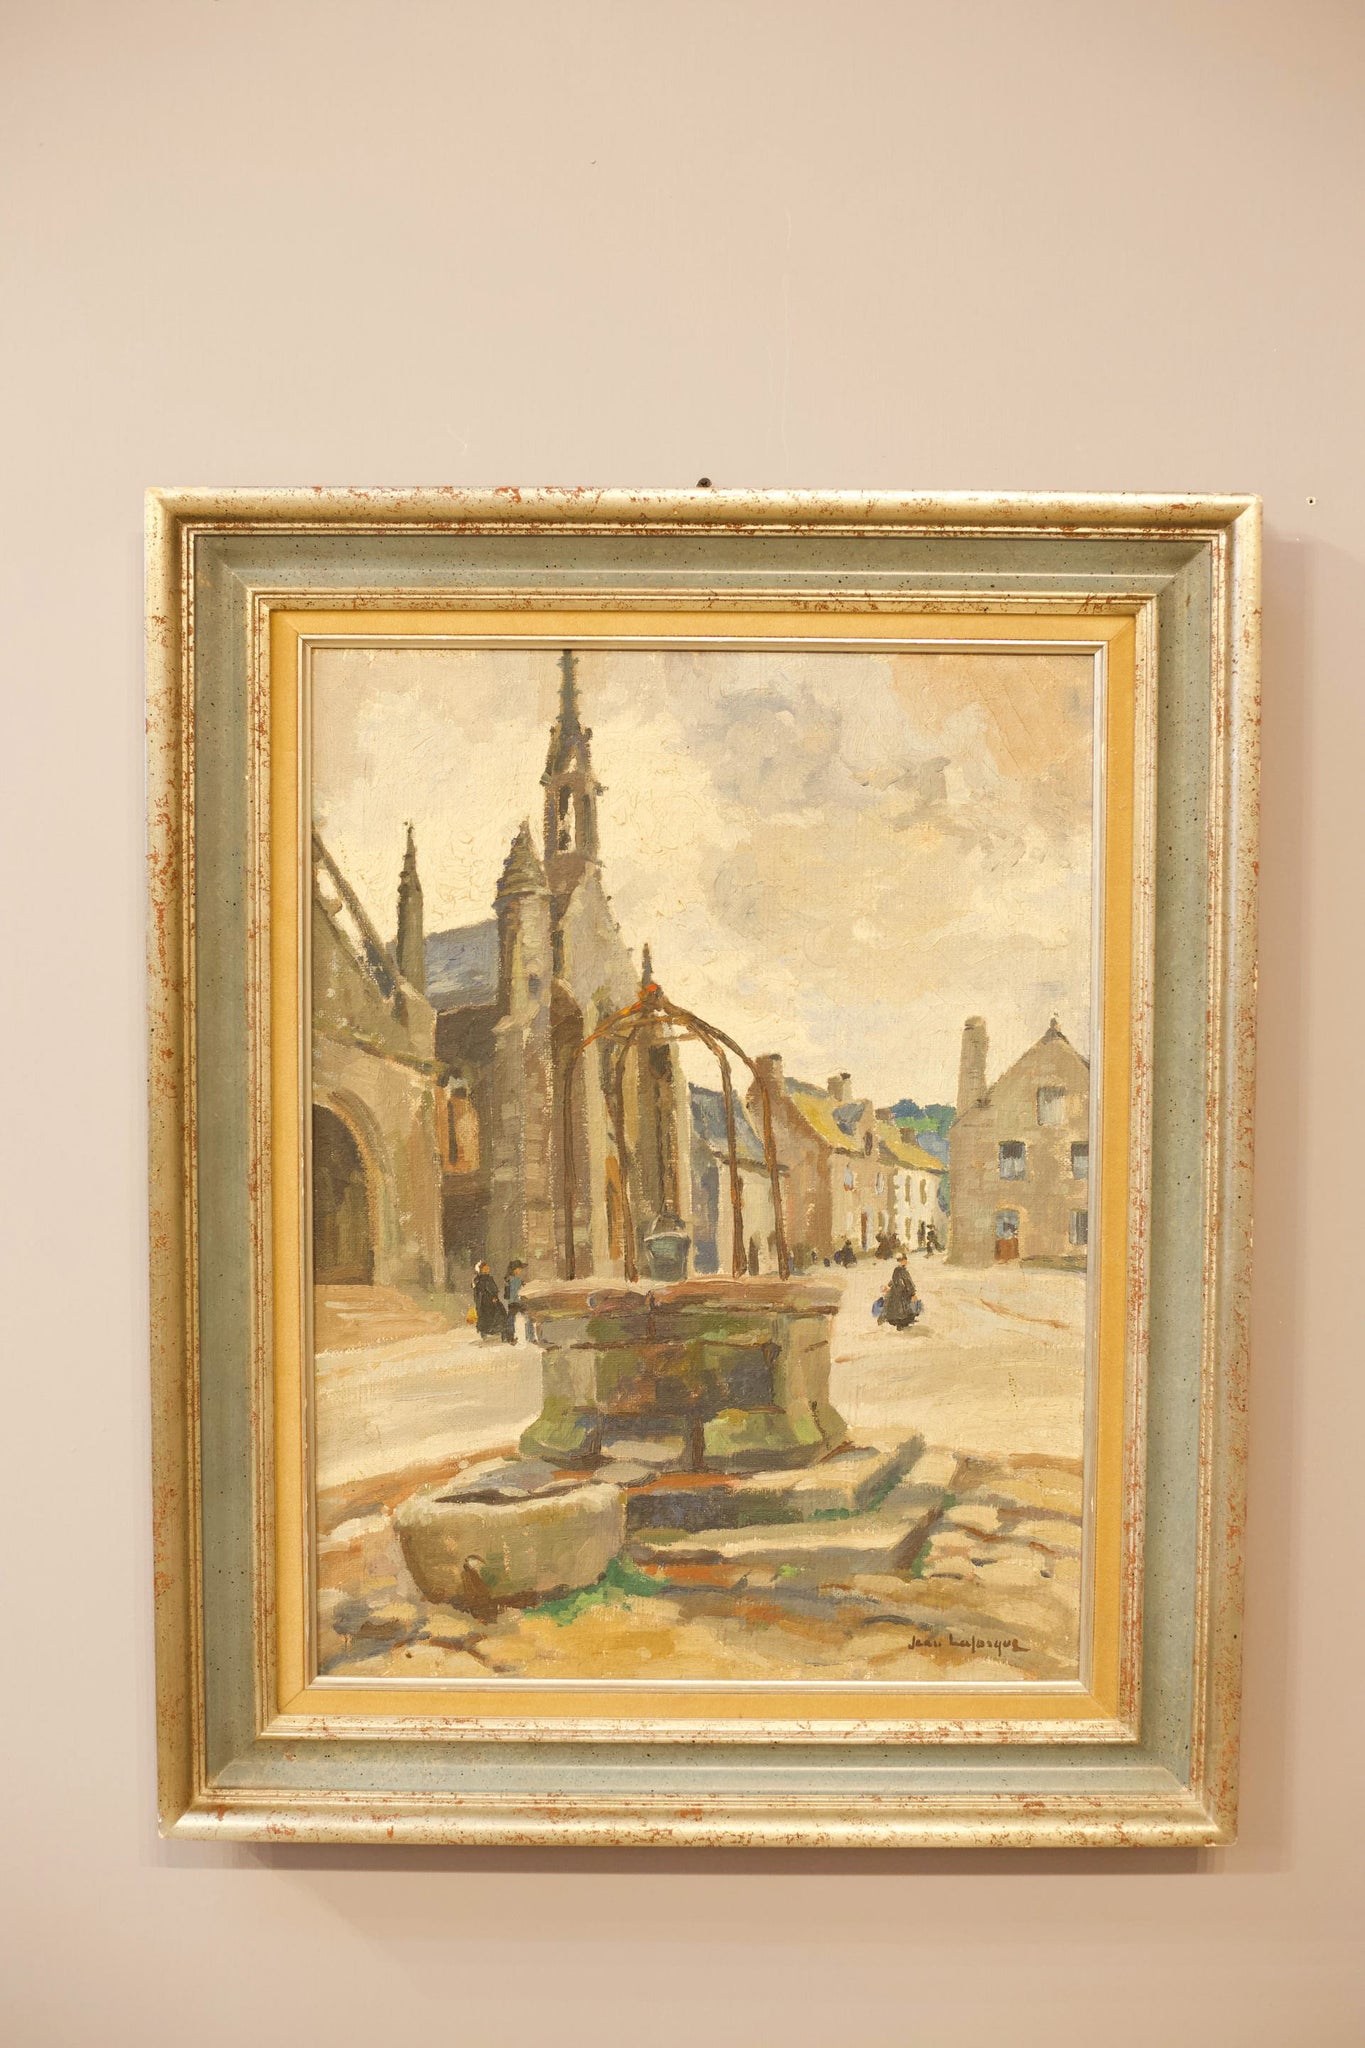 20th century oil on canvas painting by Jean LaForgue